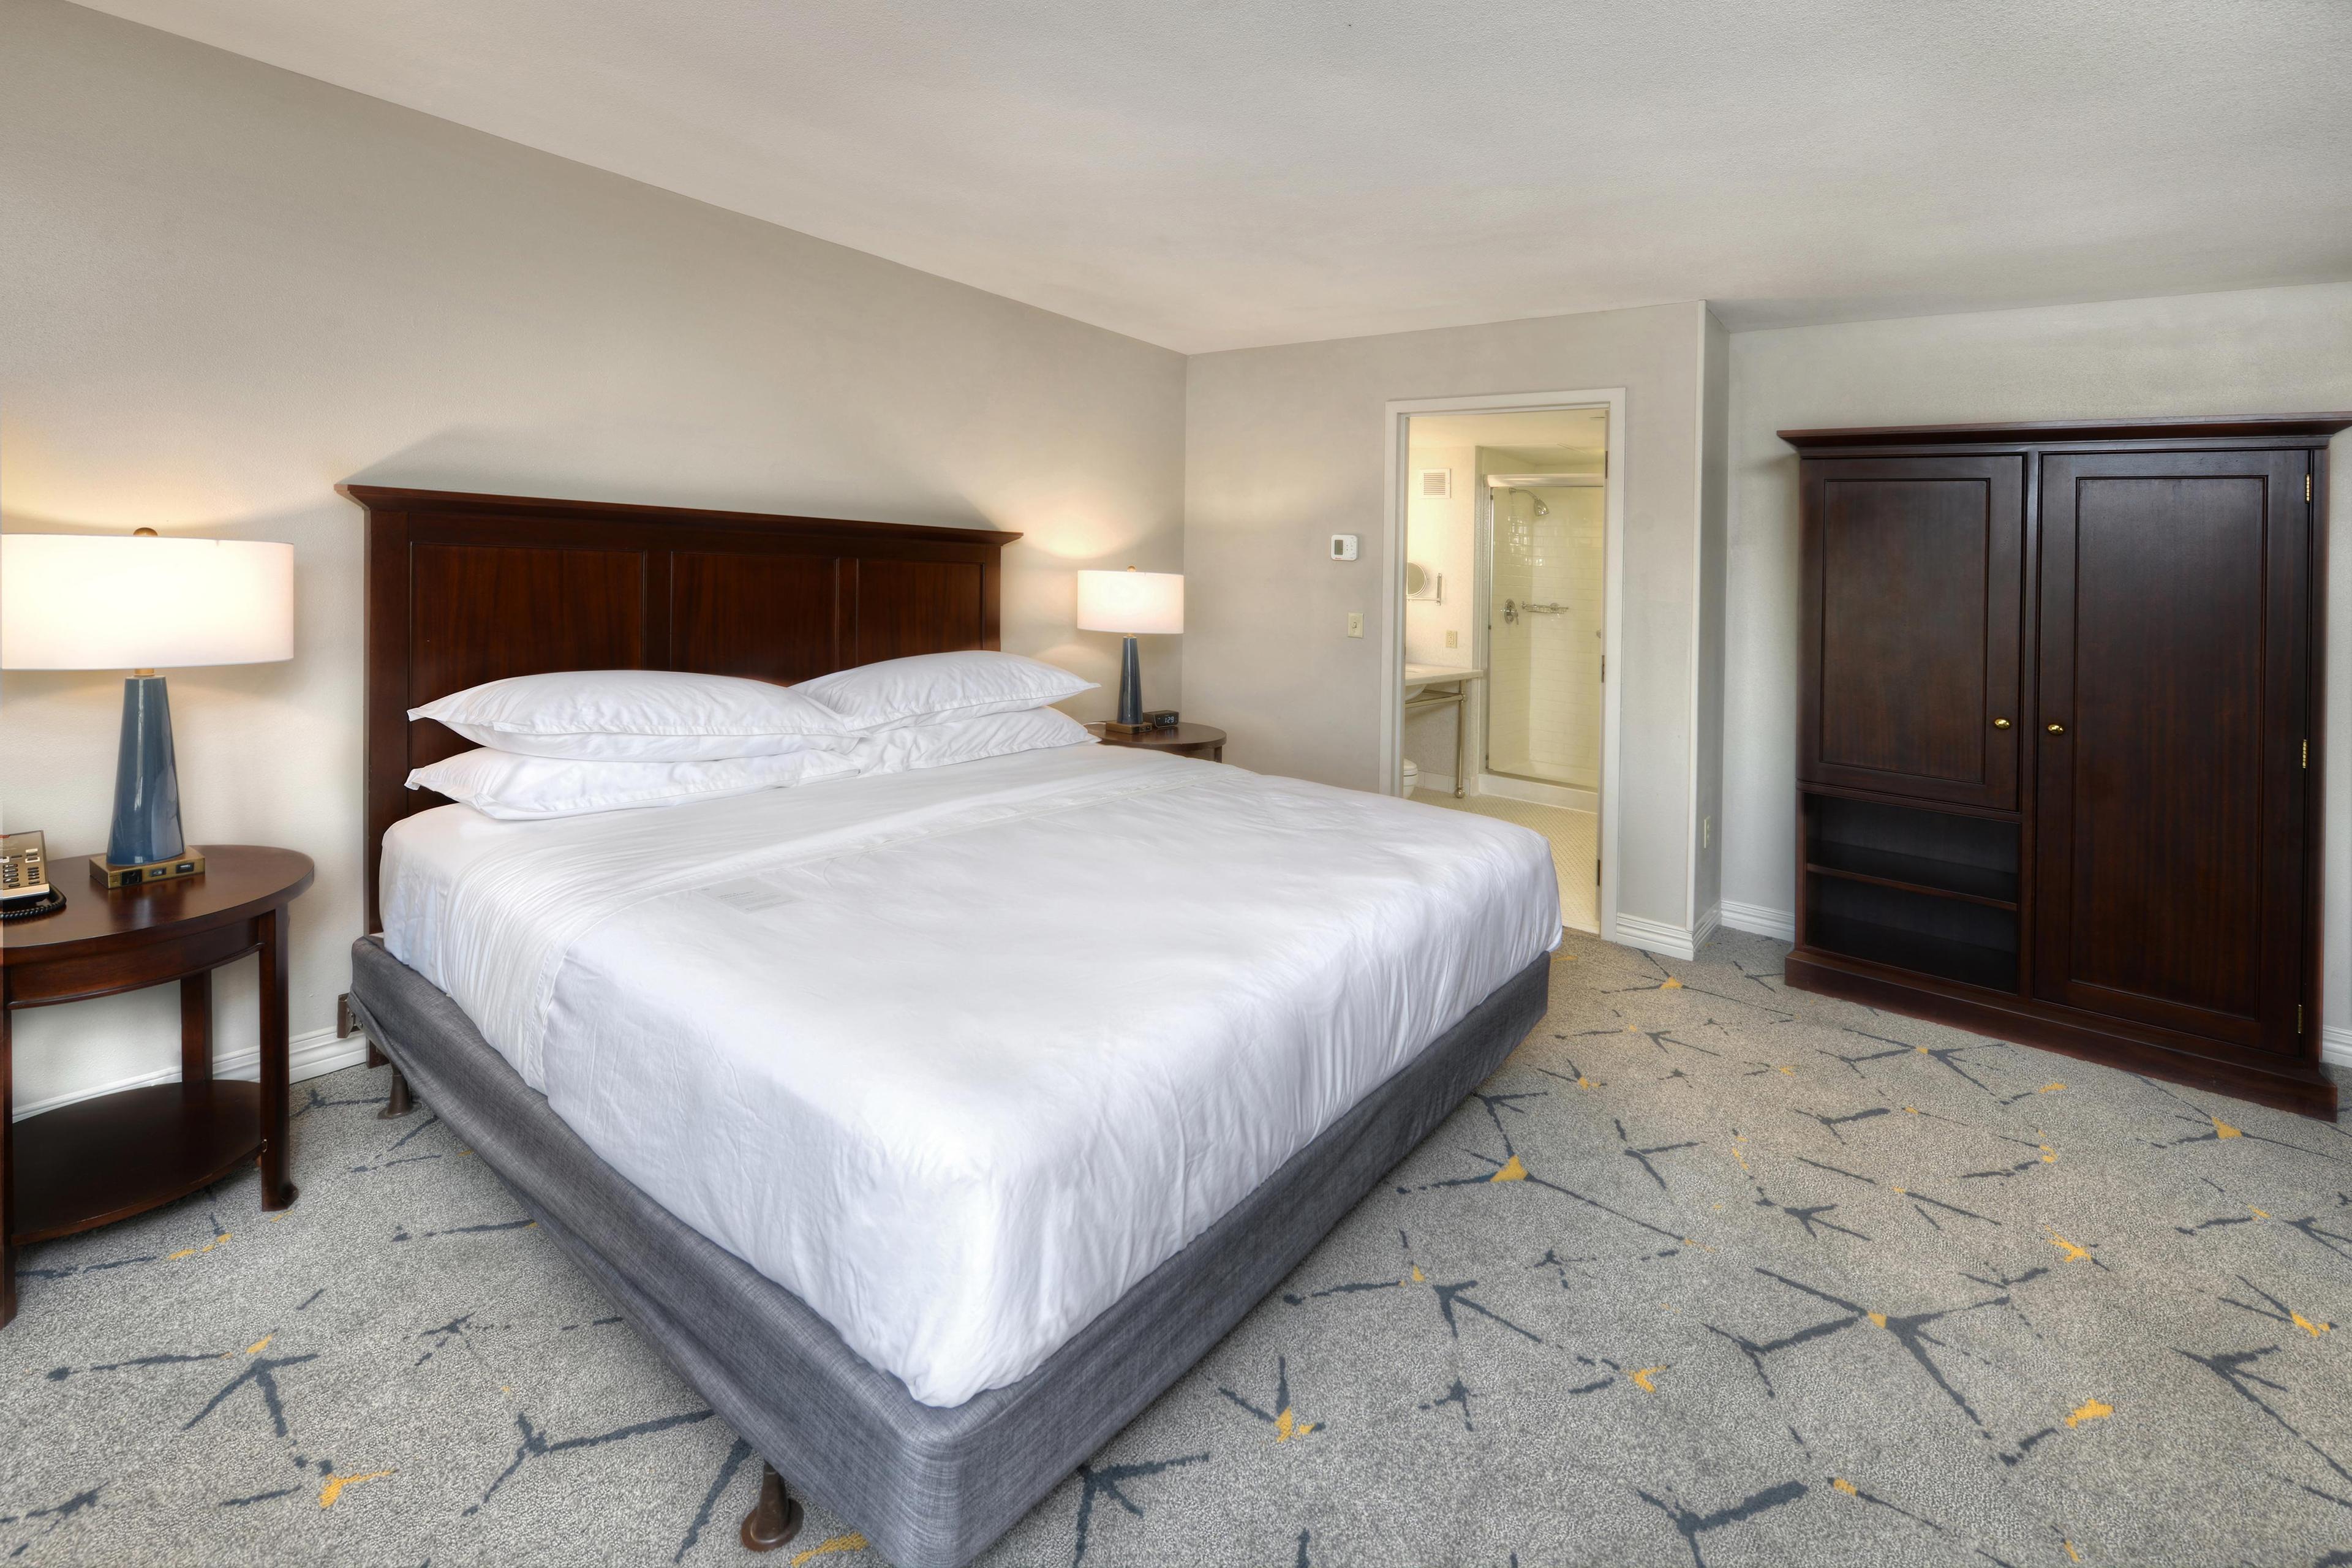 The Sheraton BWI's extra-large king bedded guestrooms gives you plenty of room to relax after a long day.